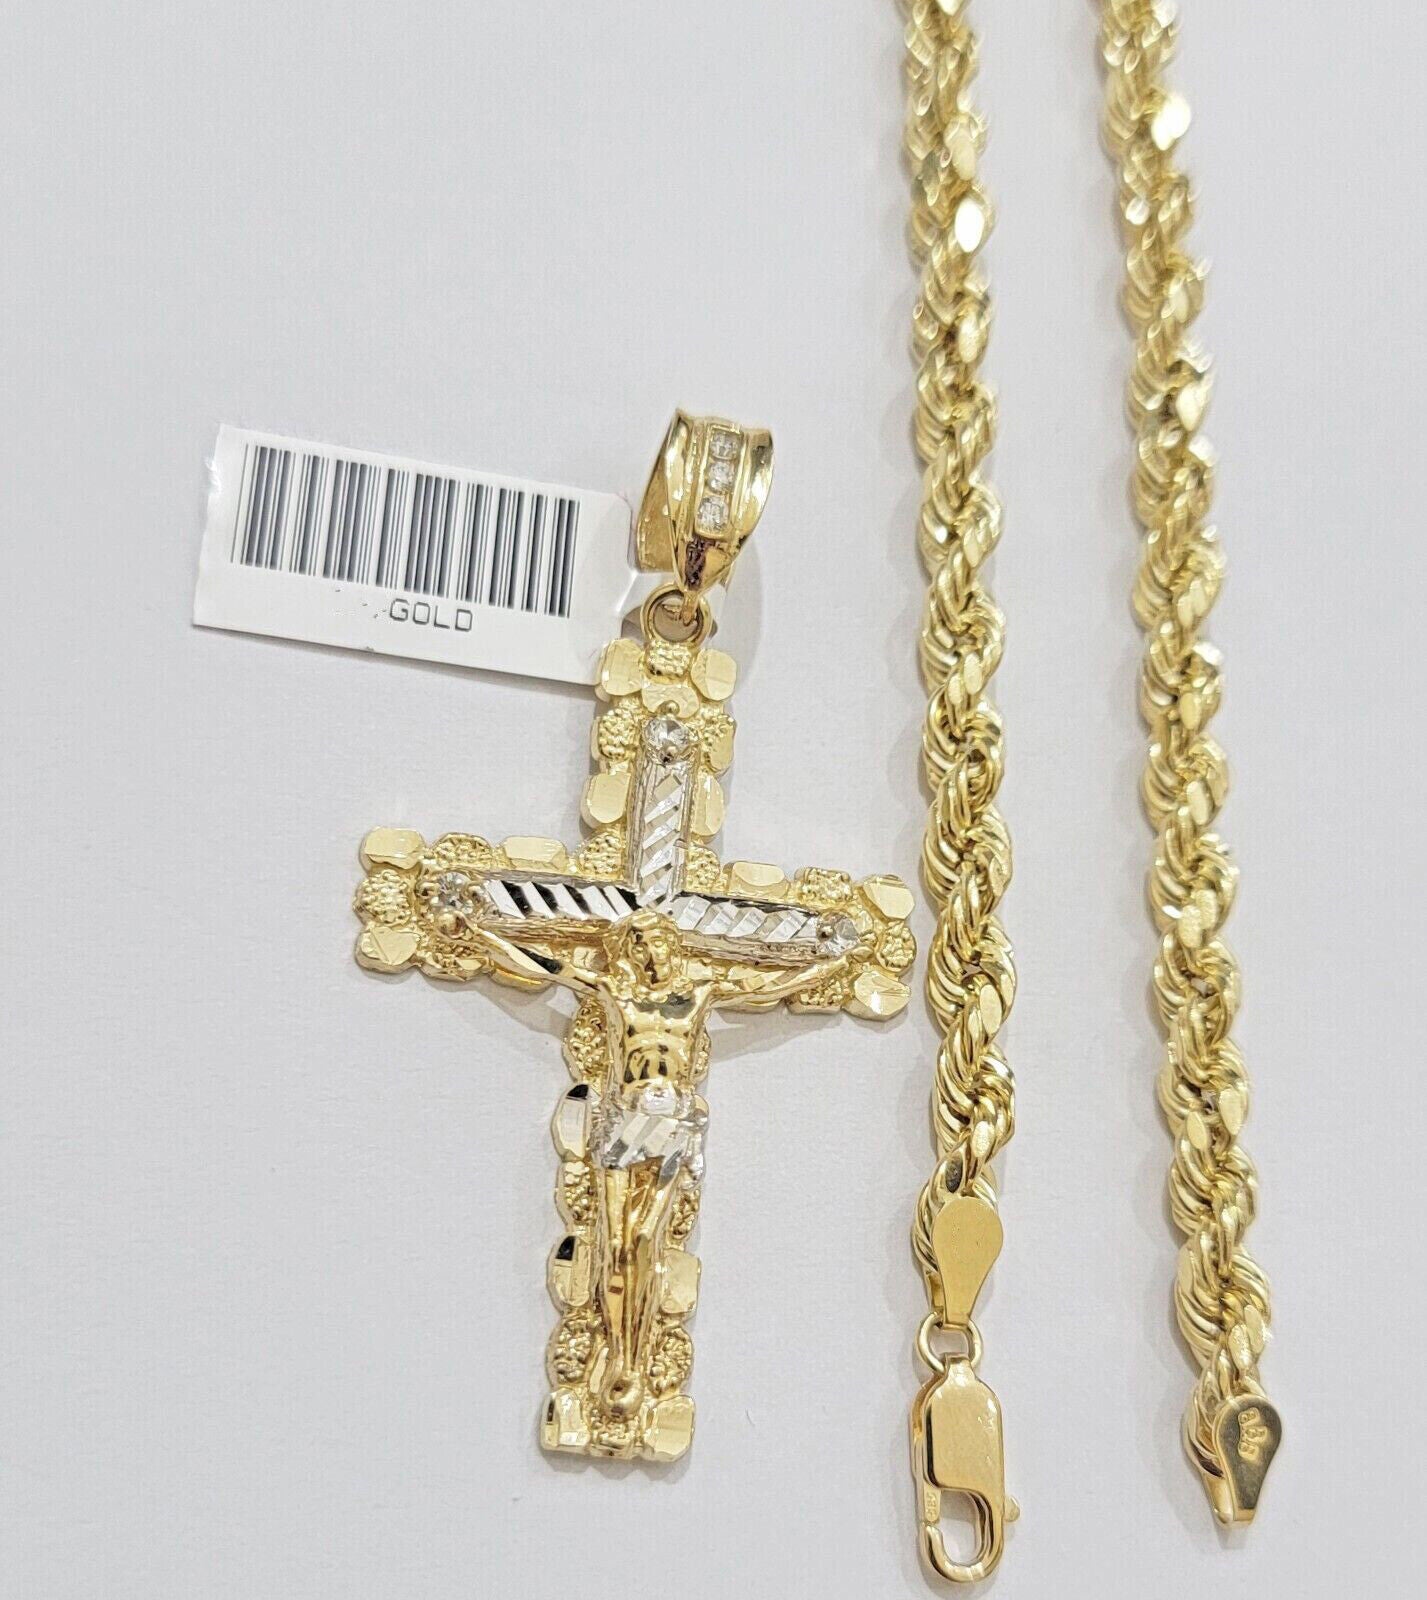 Real 10k Gold Rope Chain 22 inch Jesus Cross Charm Pendant Set 5mm Necklace Mens